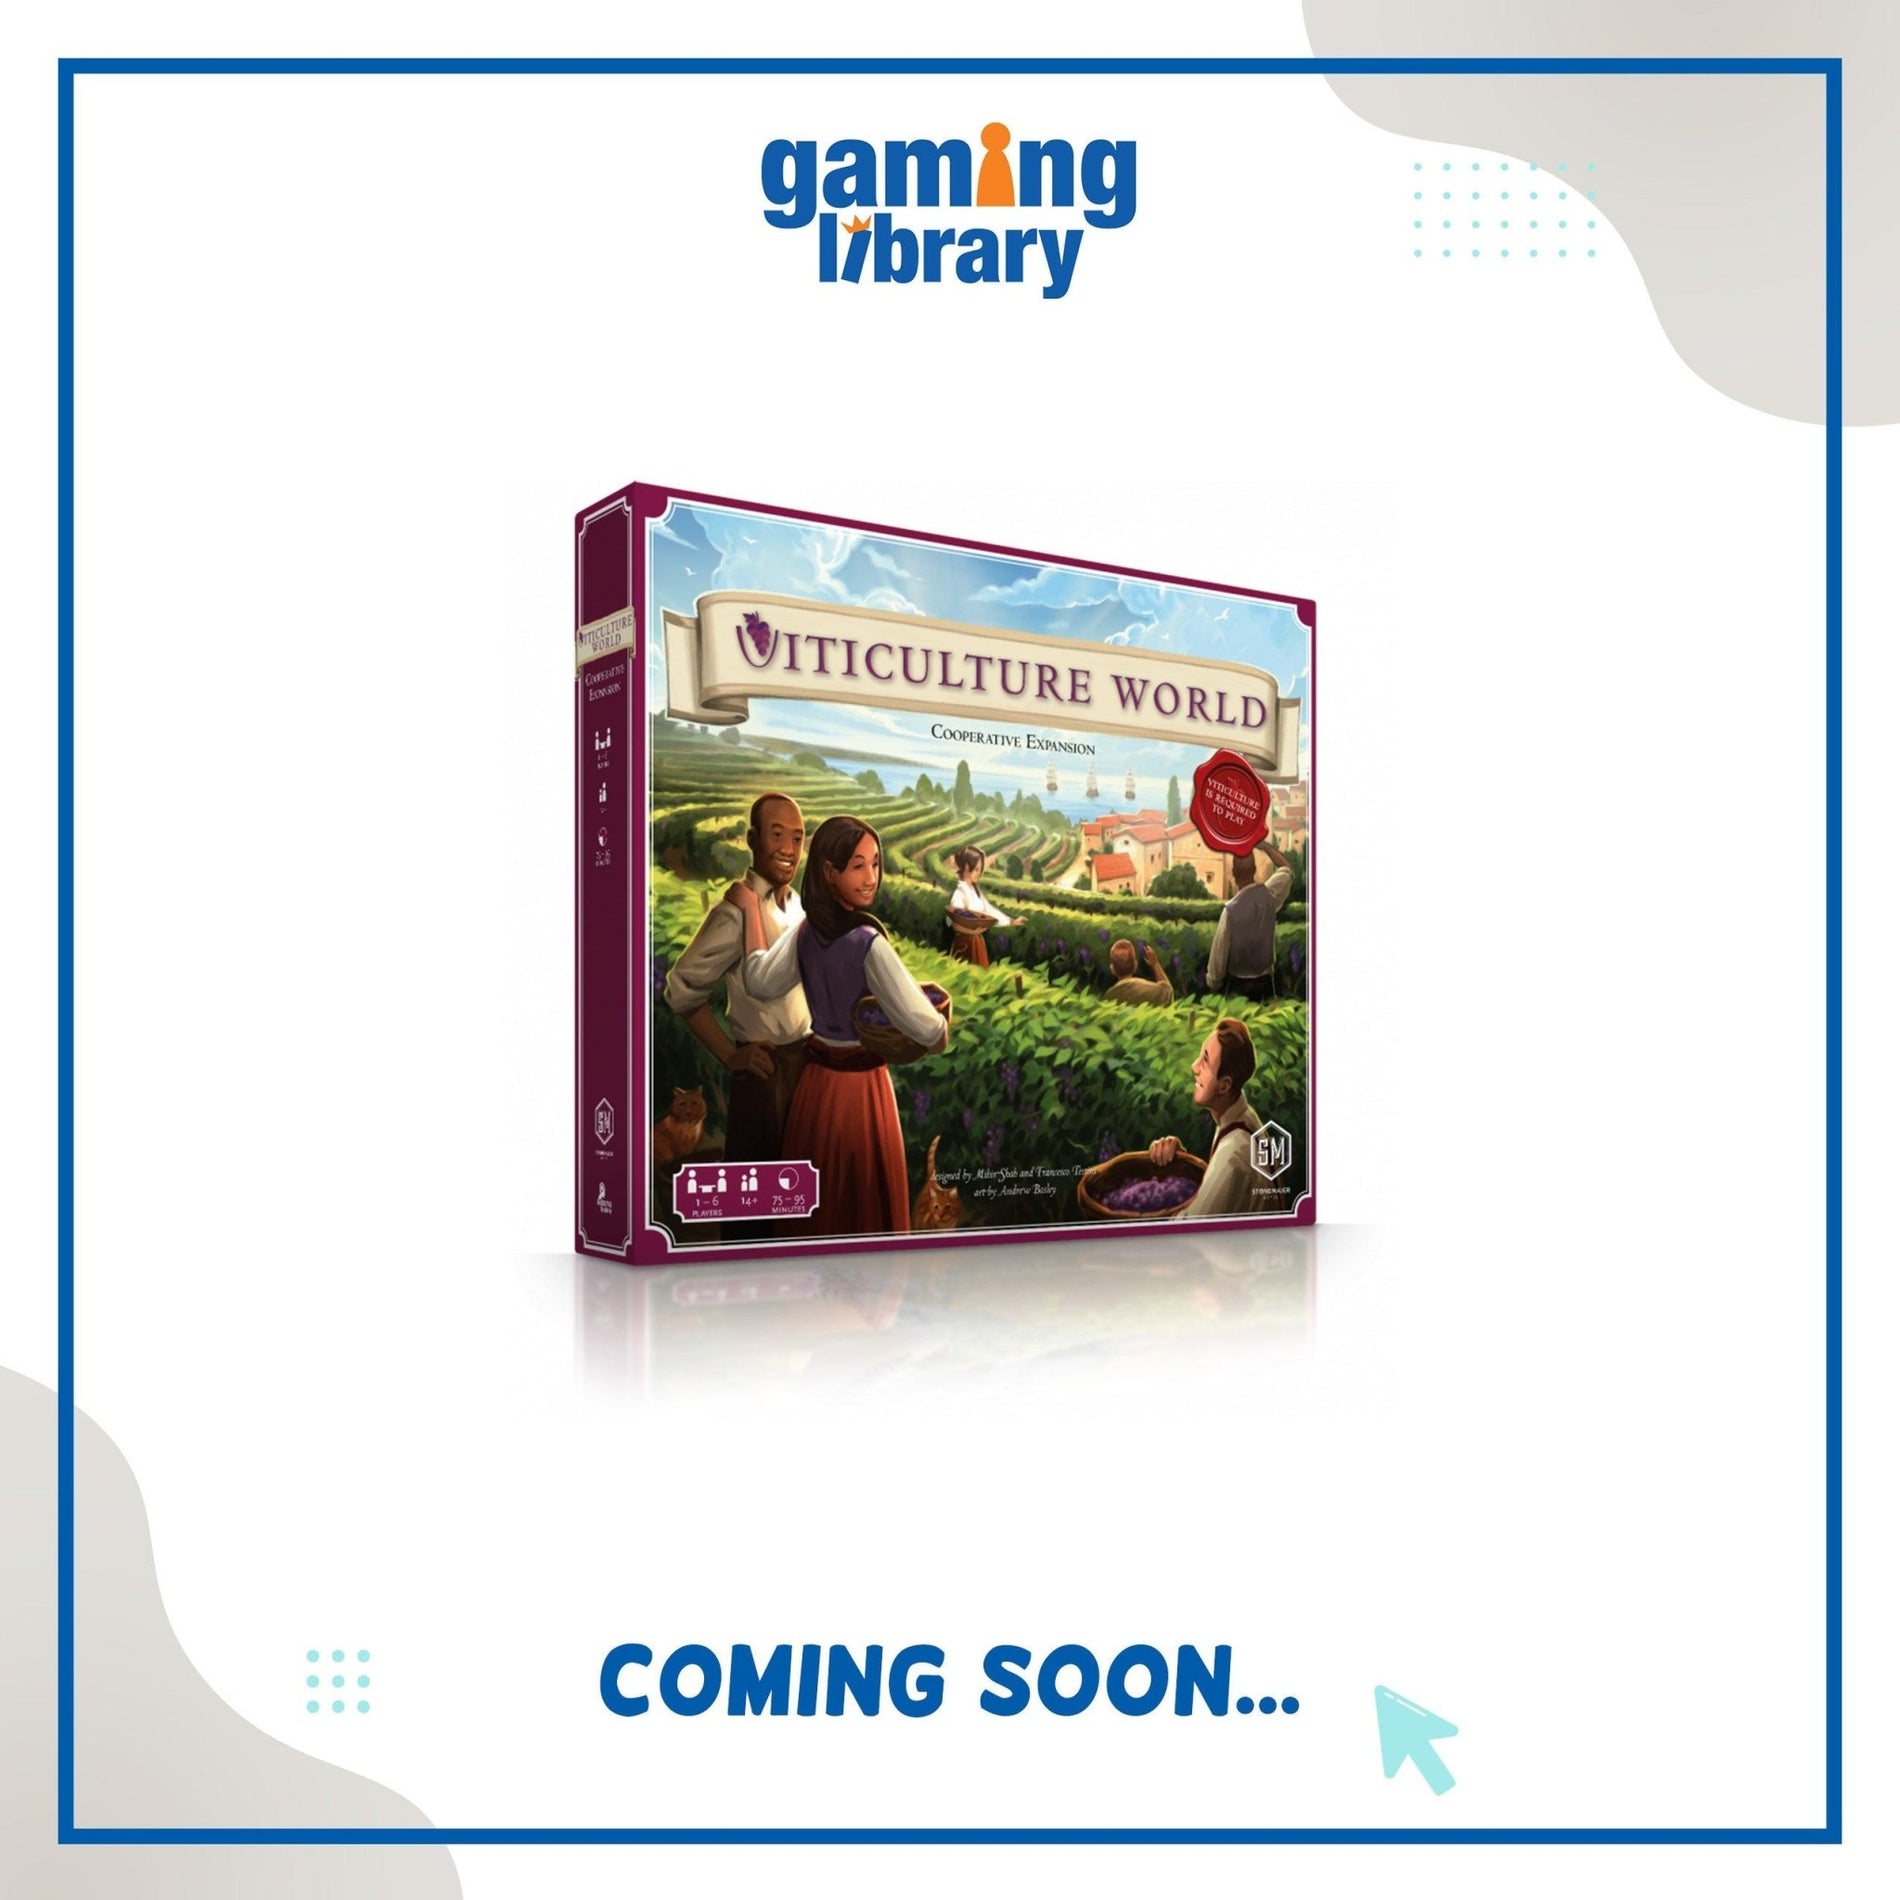 Viticulture Takes Over the World! - Gaming Library